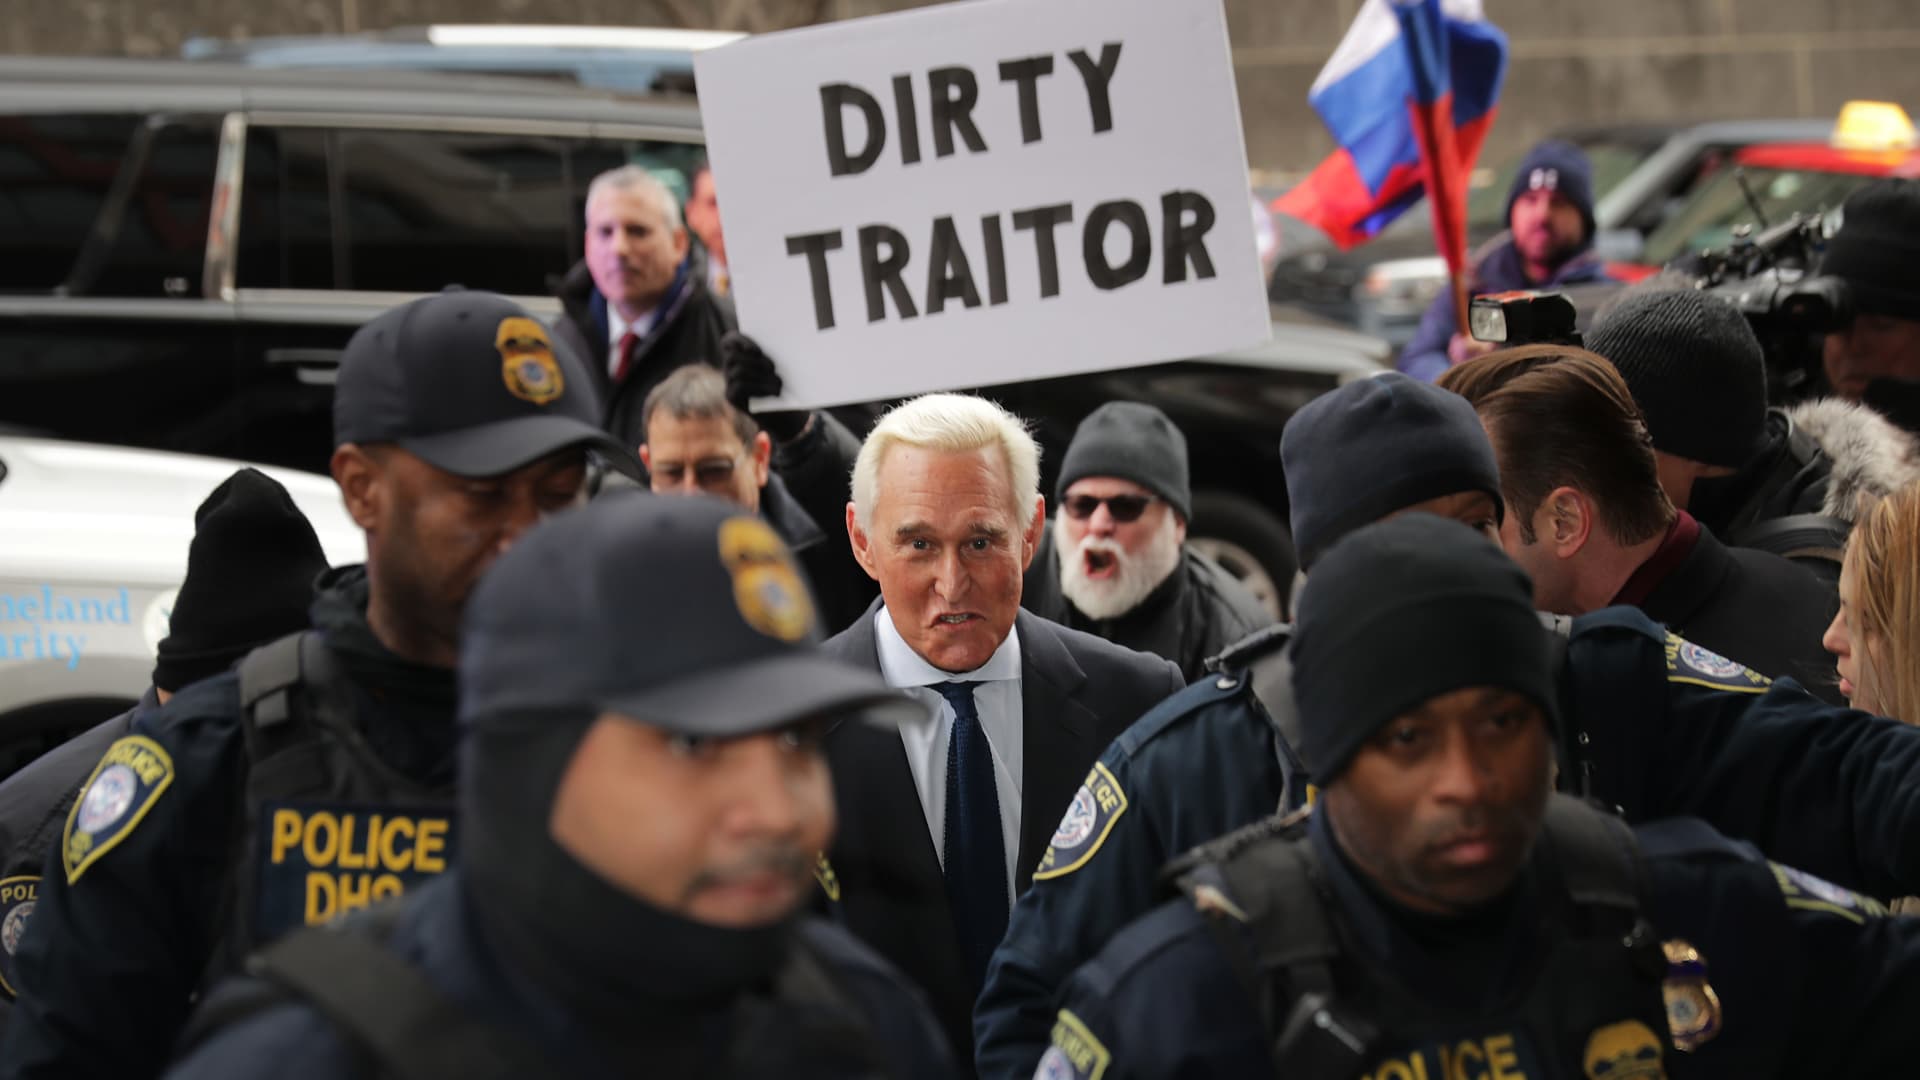 Roger Stone, a longtime adviser to President Donald Trump, arrives at the Prettyman United States Courthouse before facing charges from Special Counsel Robert Mueller that he lied to Congress and engaged in witness tampering January 29, 2019 in Washington, DC. A self-described 'political dirty-trickster,' Stone said he has been falsely accused and will plead 'not guilty.'